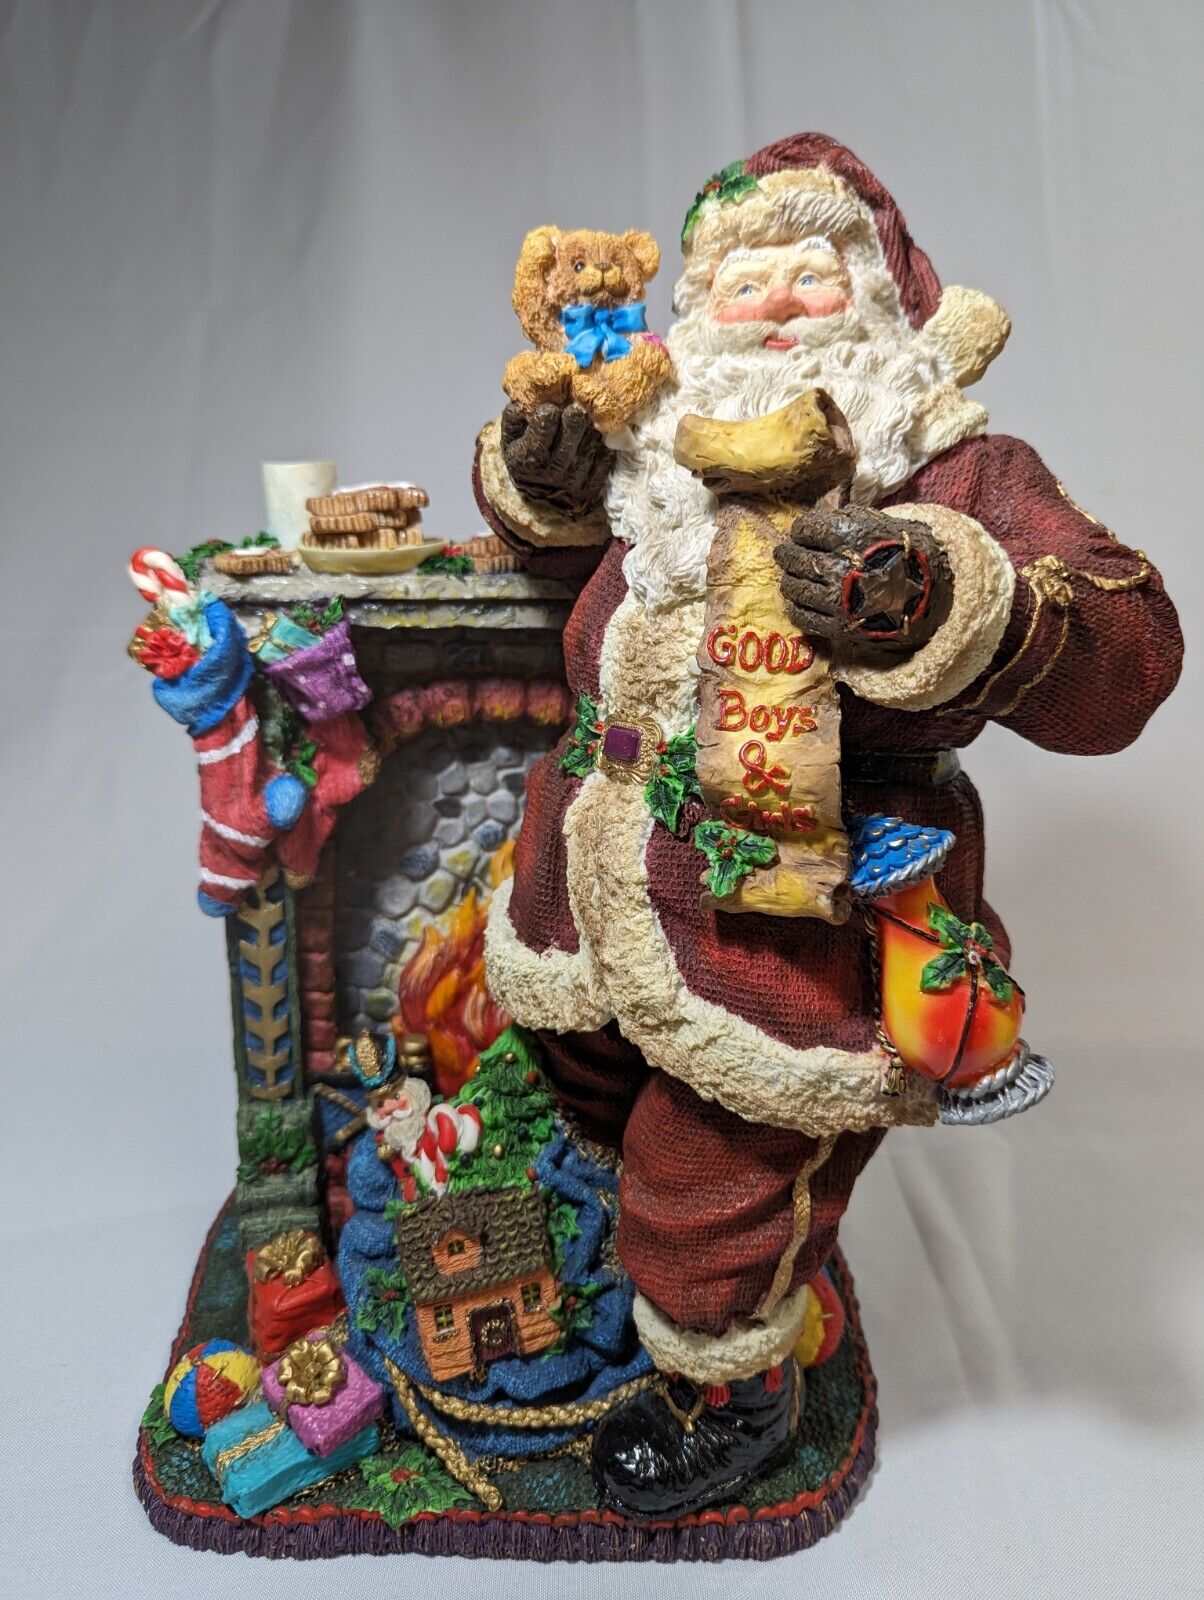 Santa “By The Chimney With Care” Christmas Display Statue Decorative Collectible